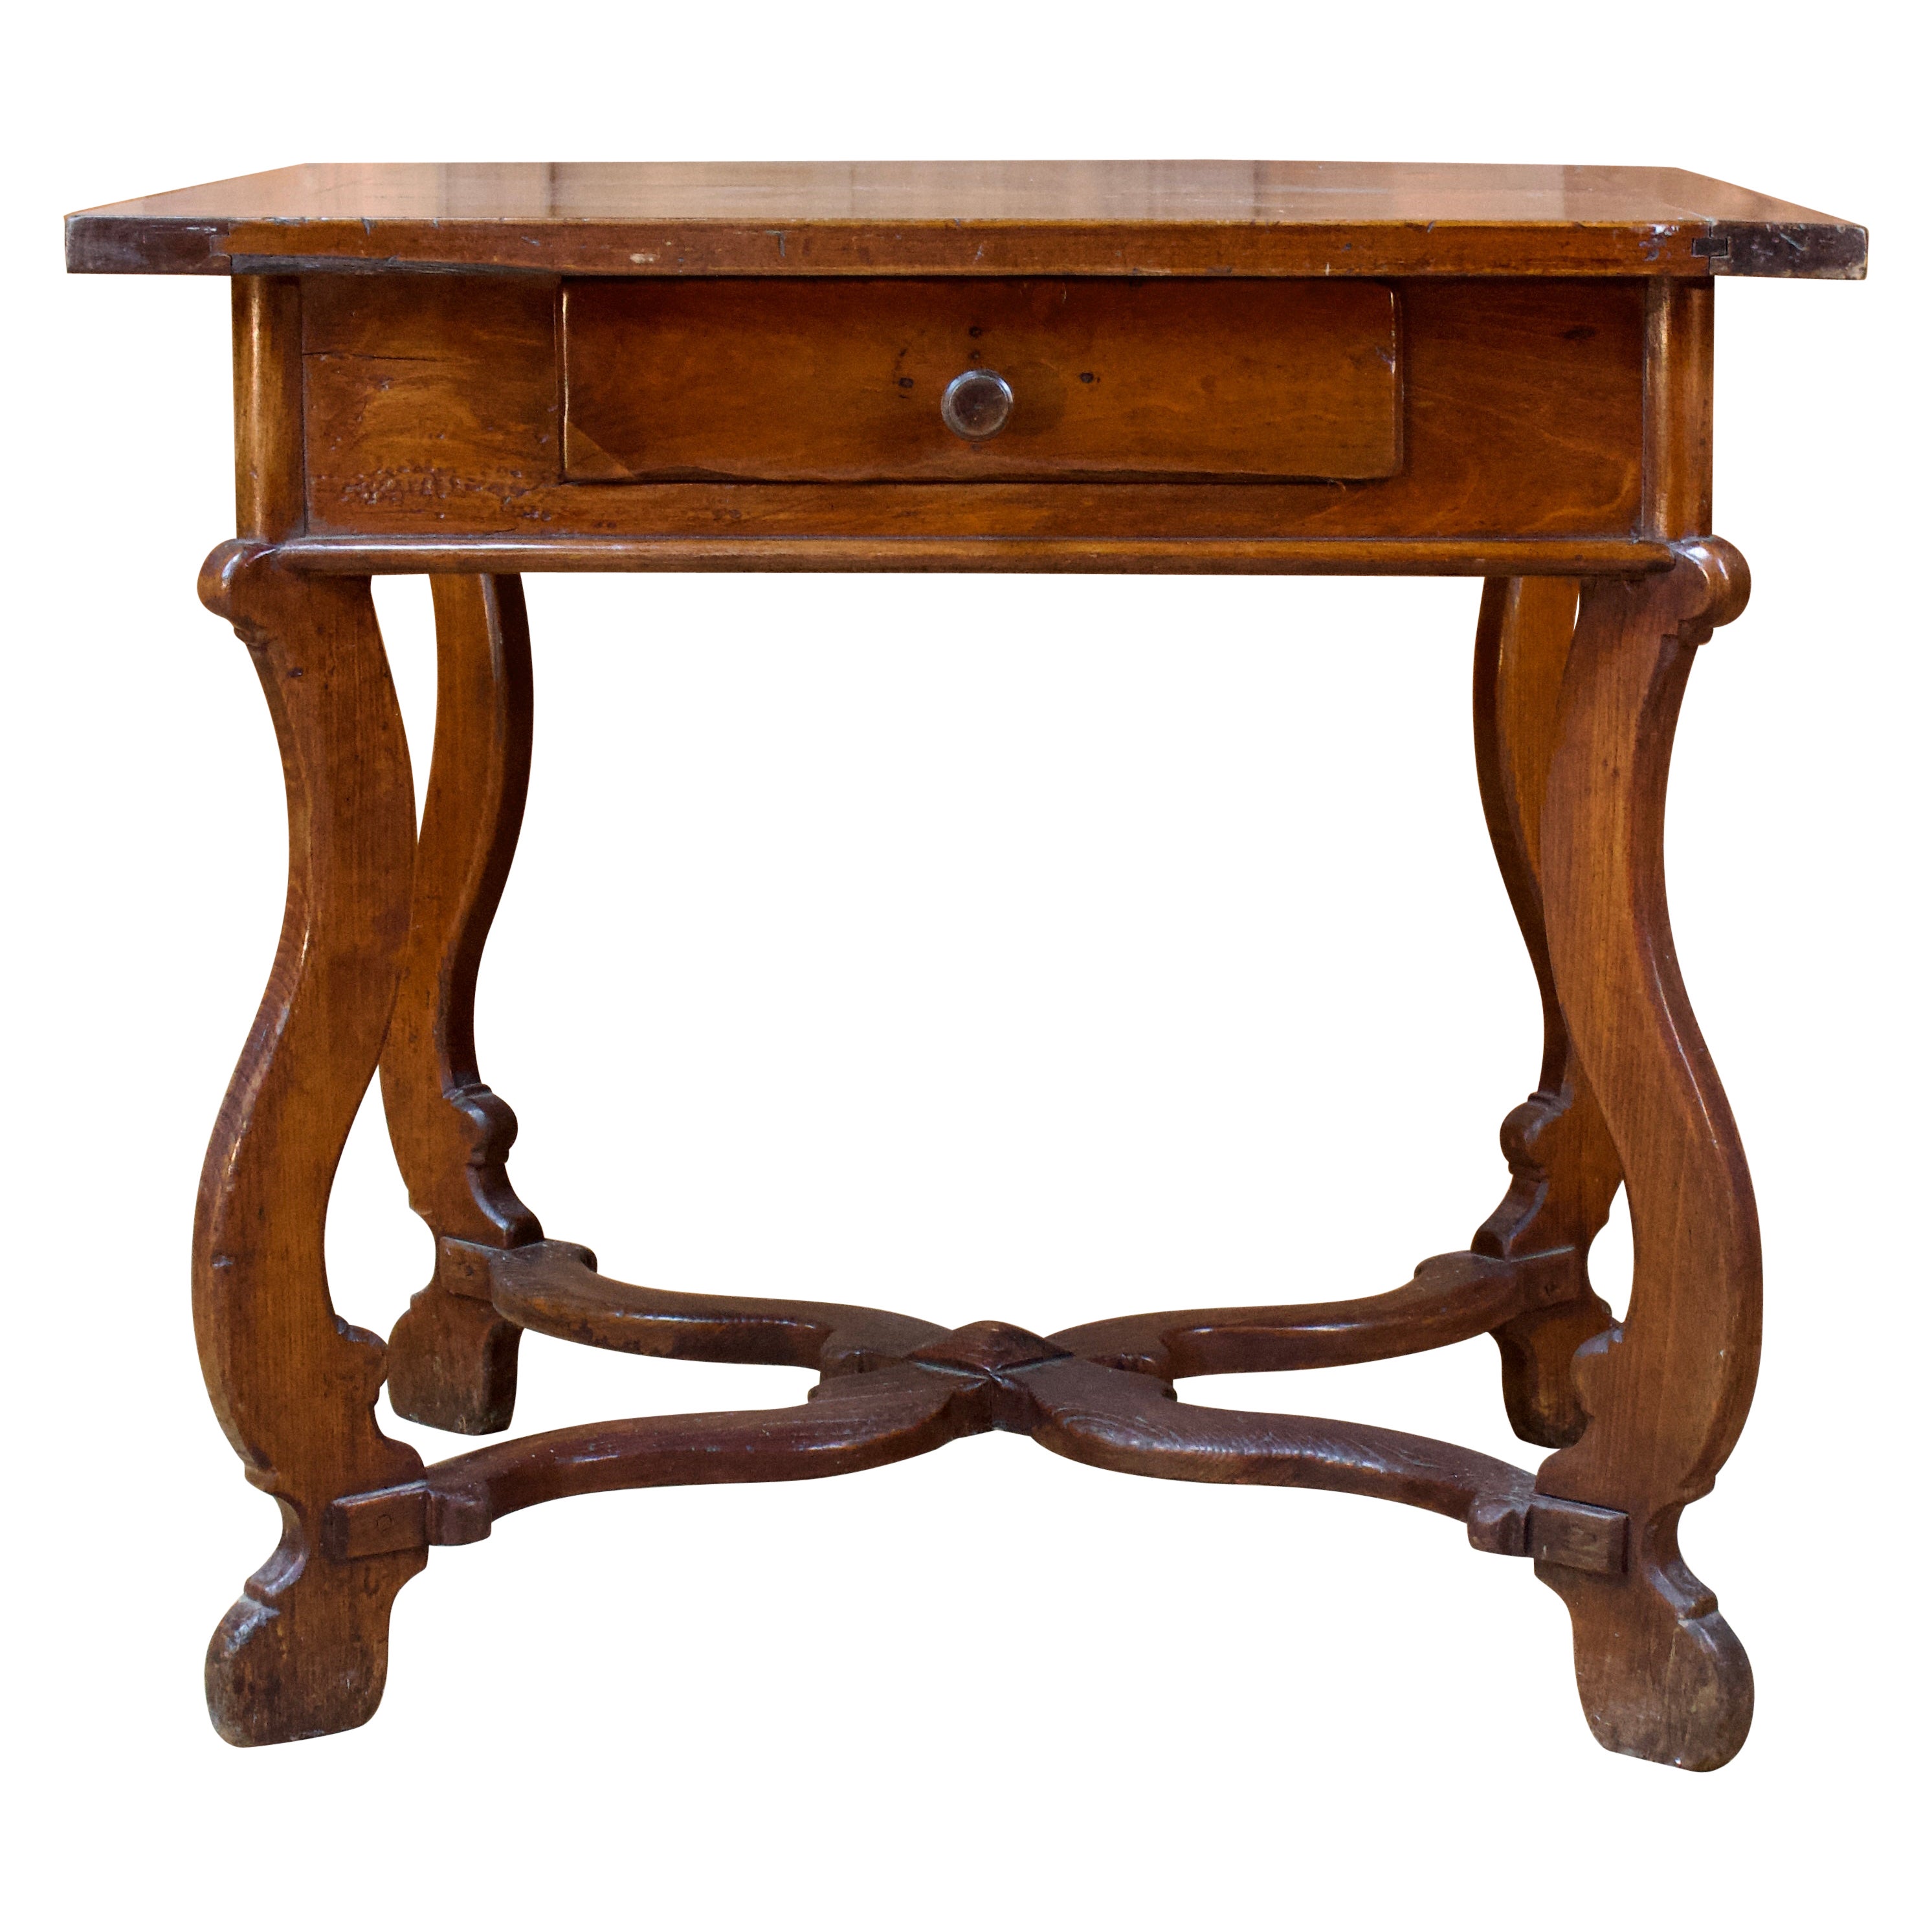 French Small "sheep bone" table in fruit wood - Louis XIV style - 19th century